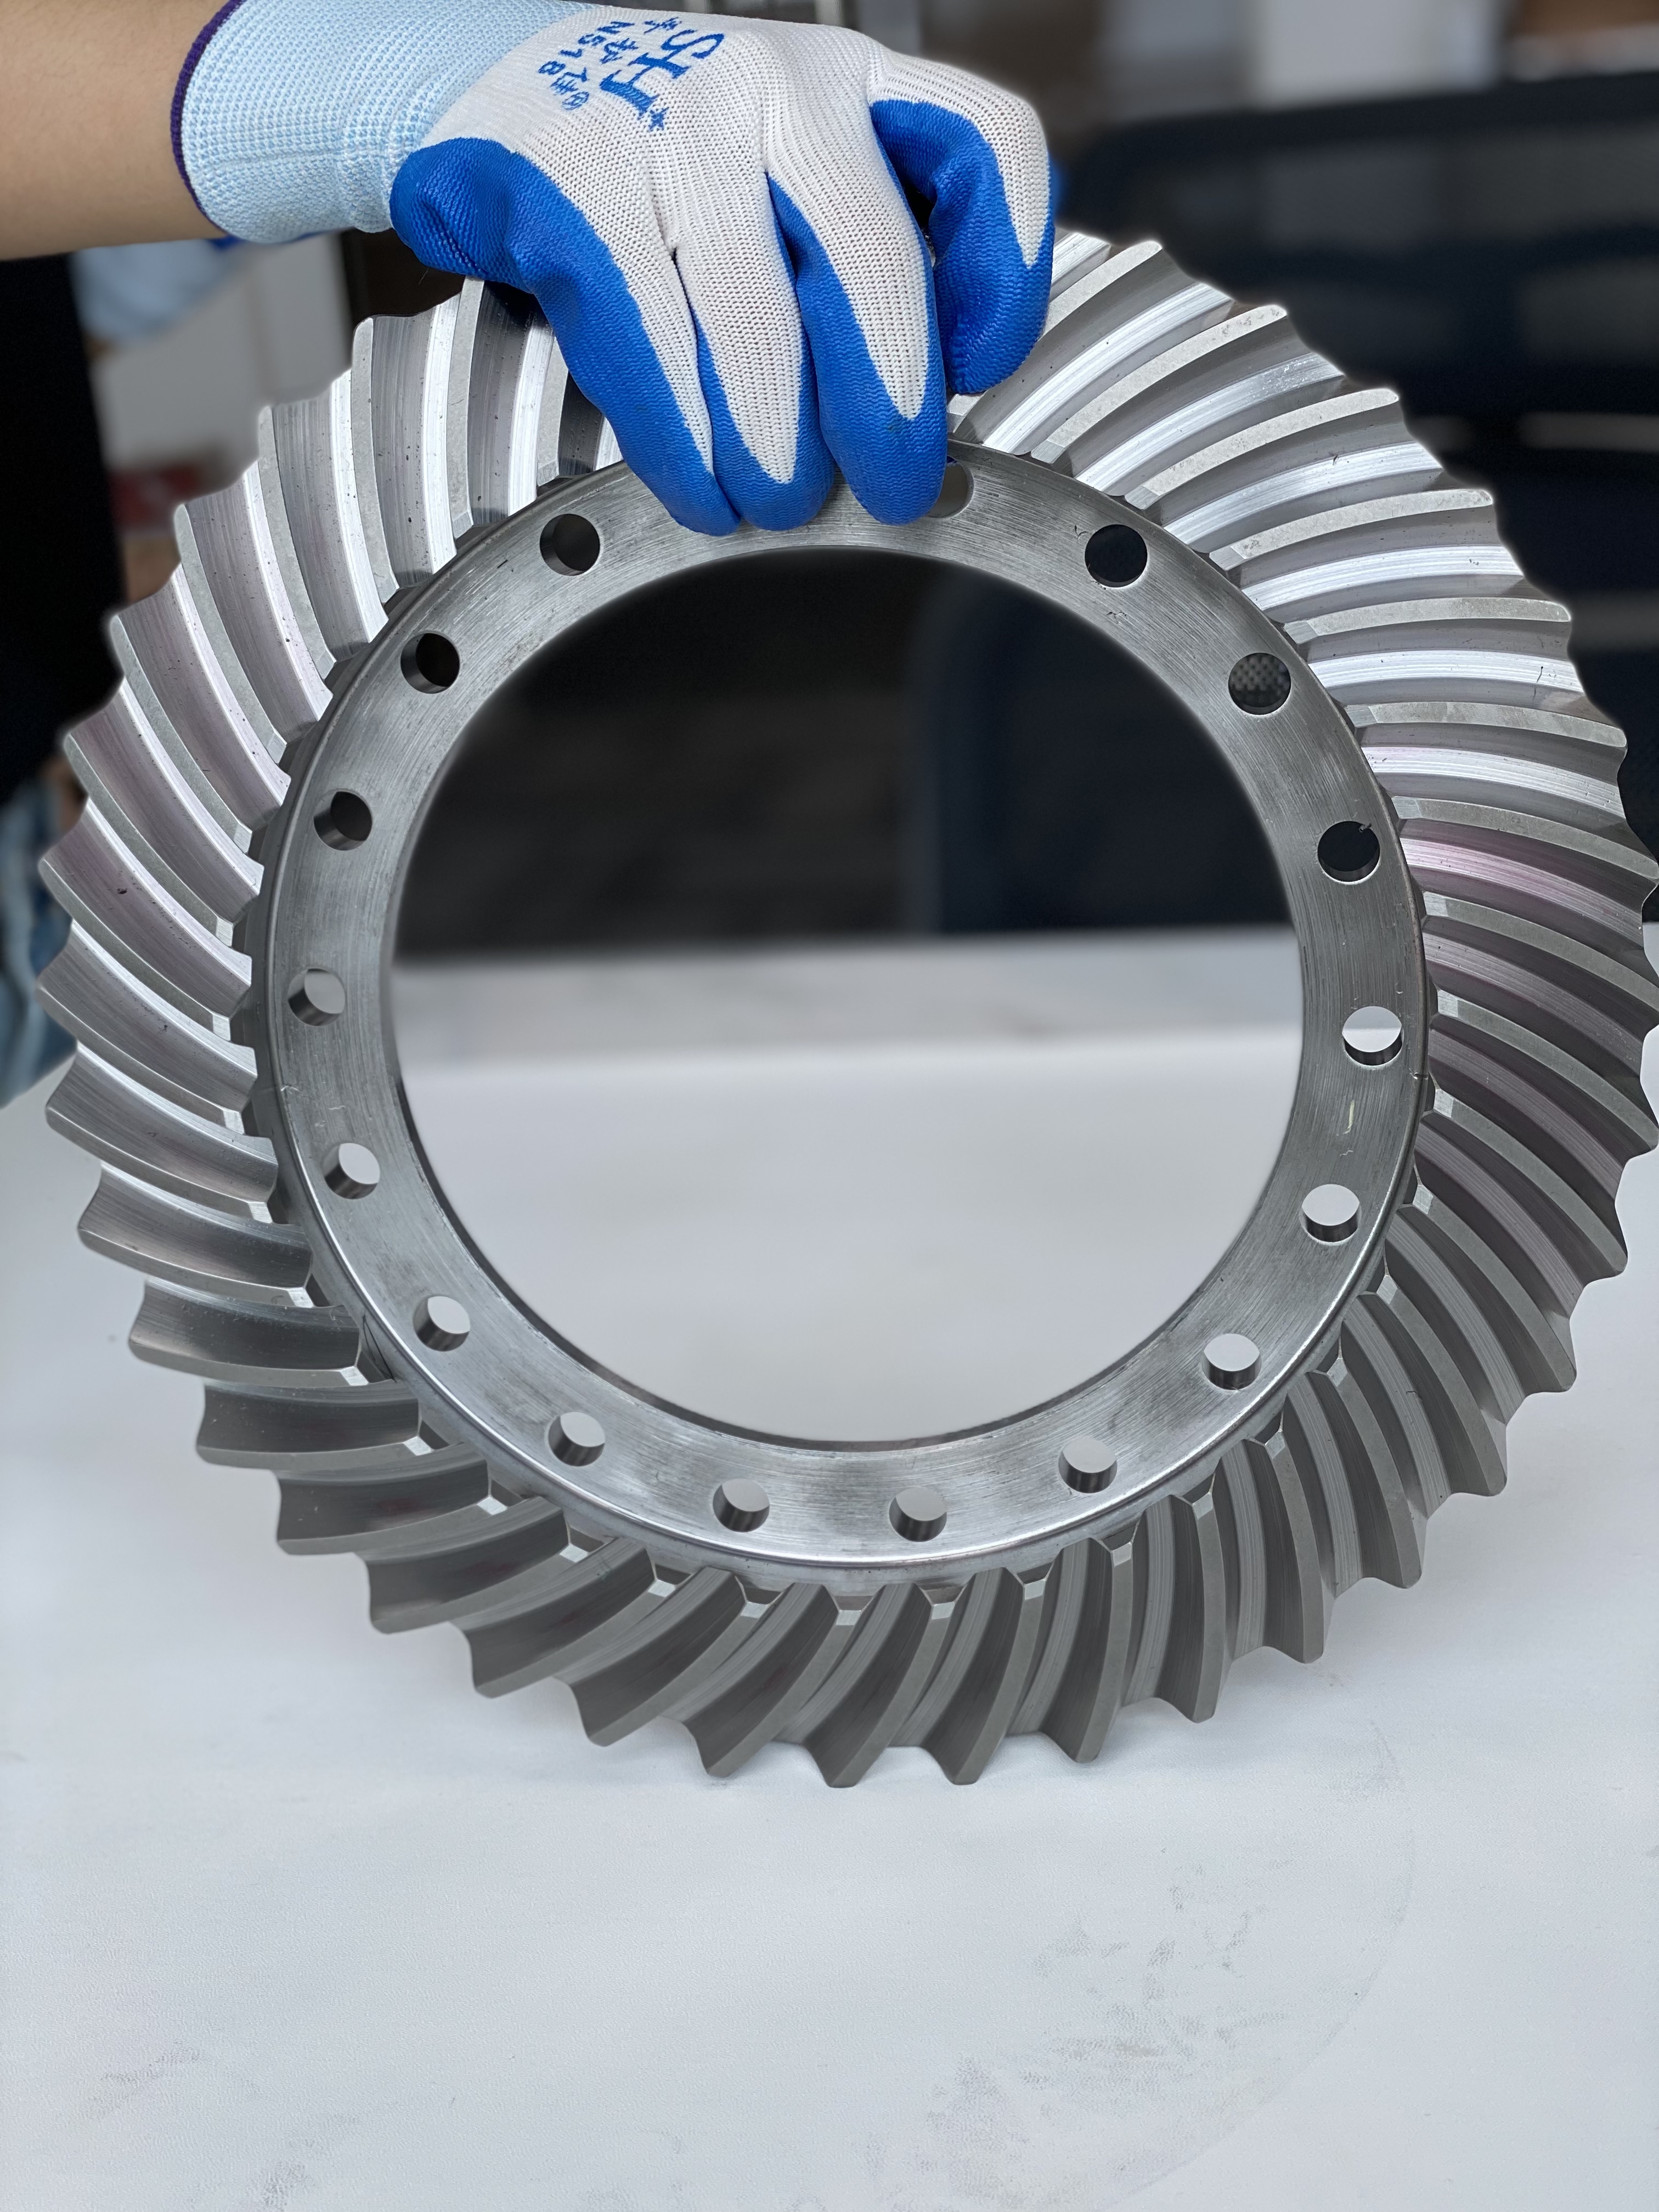 What is the difference between bevel gears and other gears?